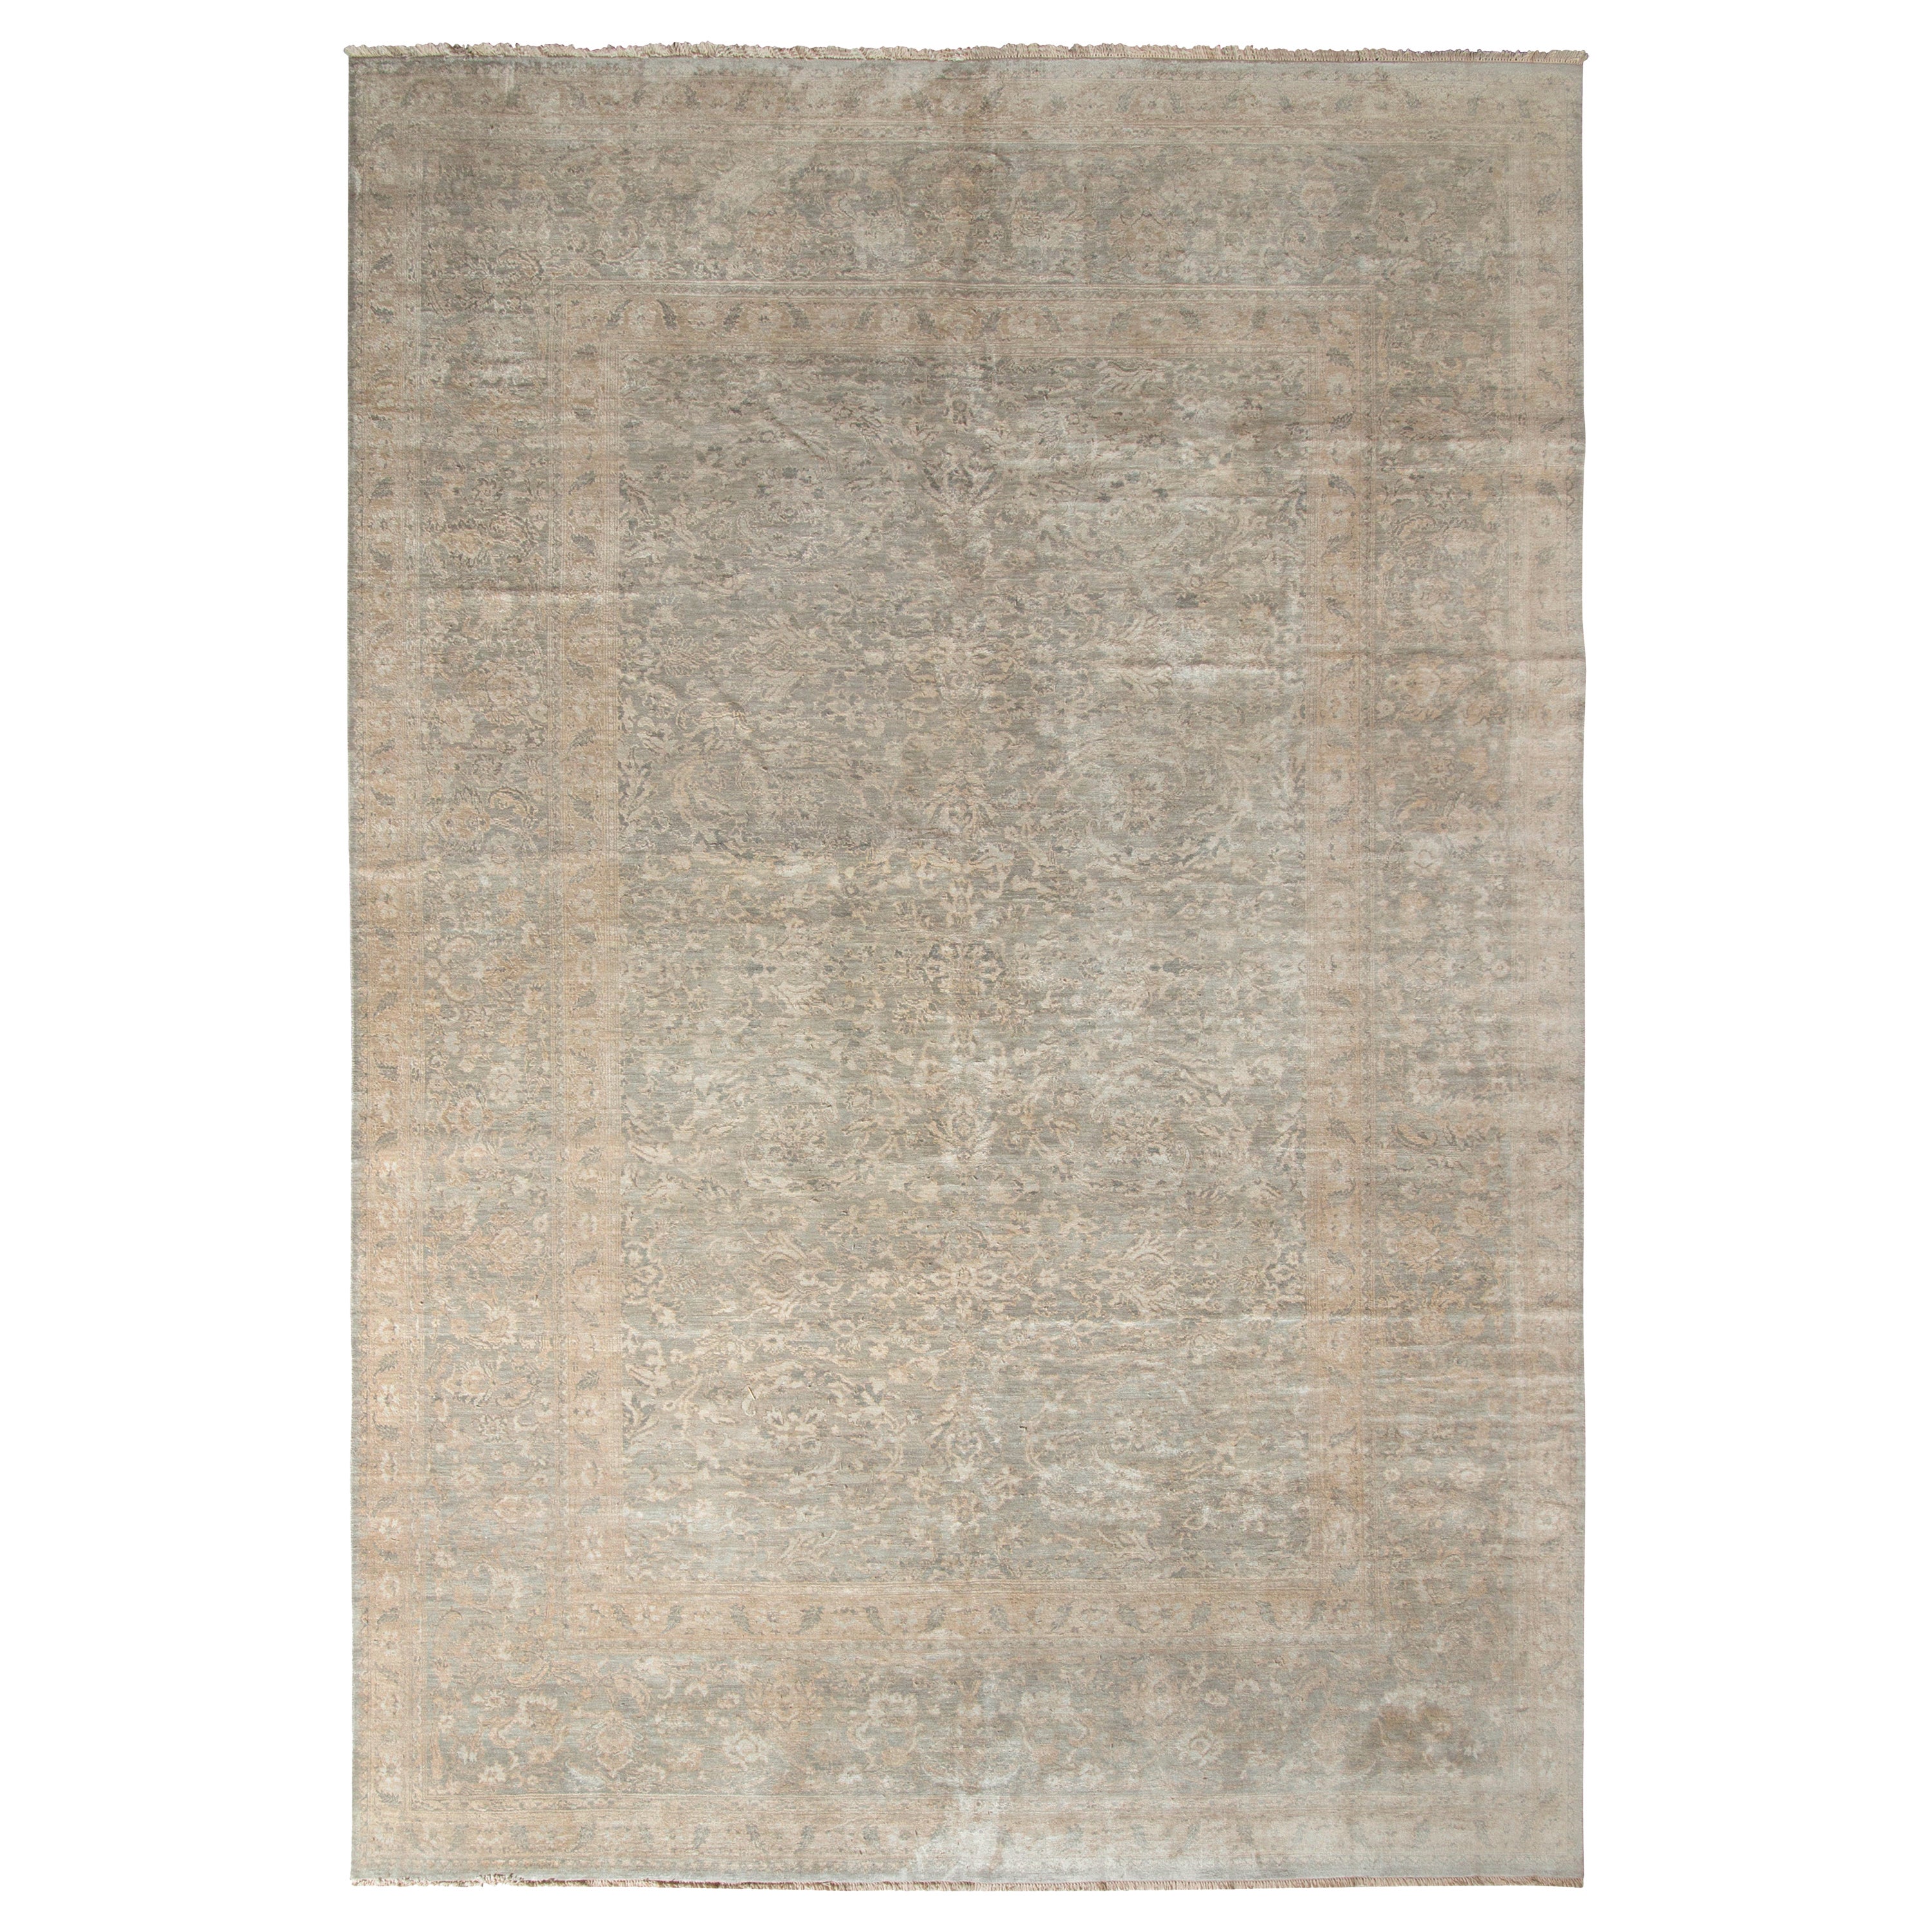 Rug & Kilim’s Transitional Style Rug in an All over Gray, Beige-Brown Floral For Sale